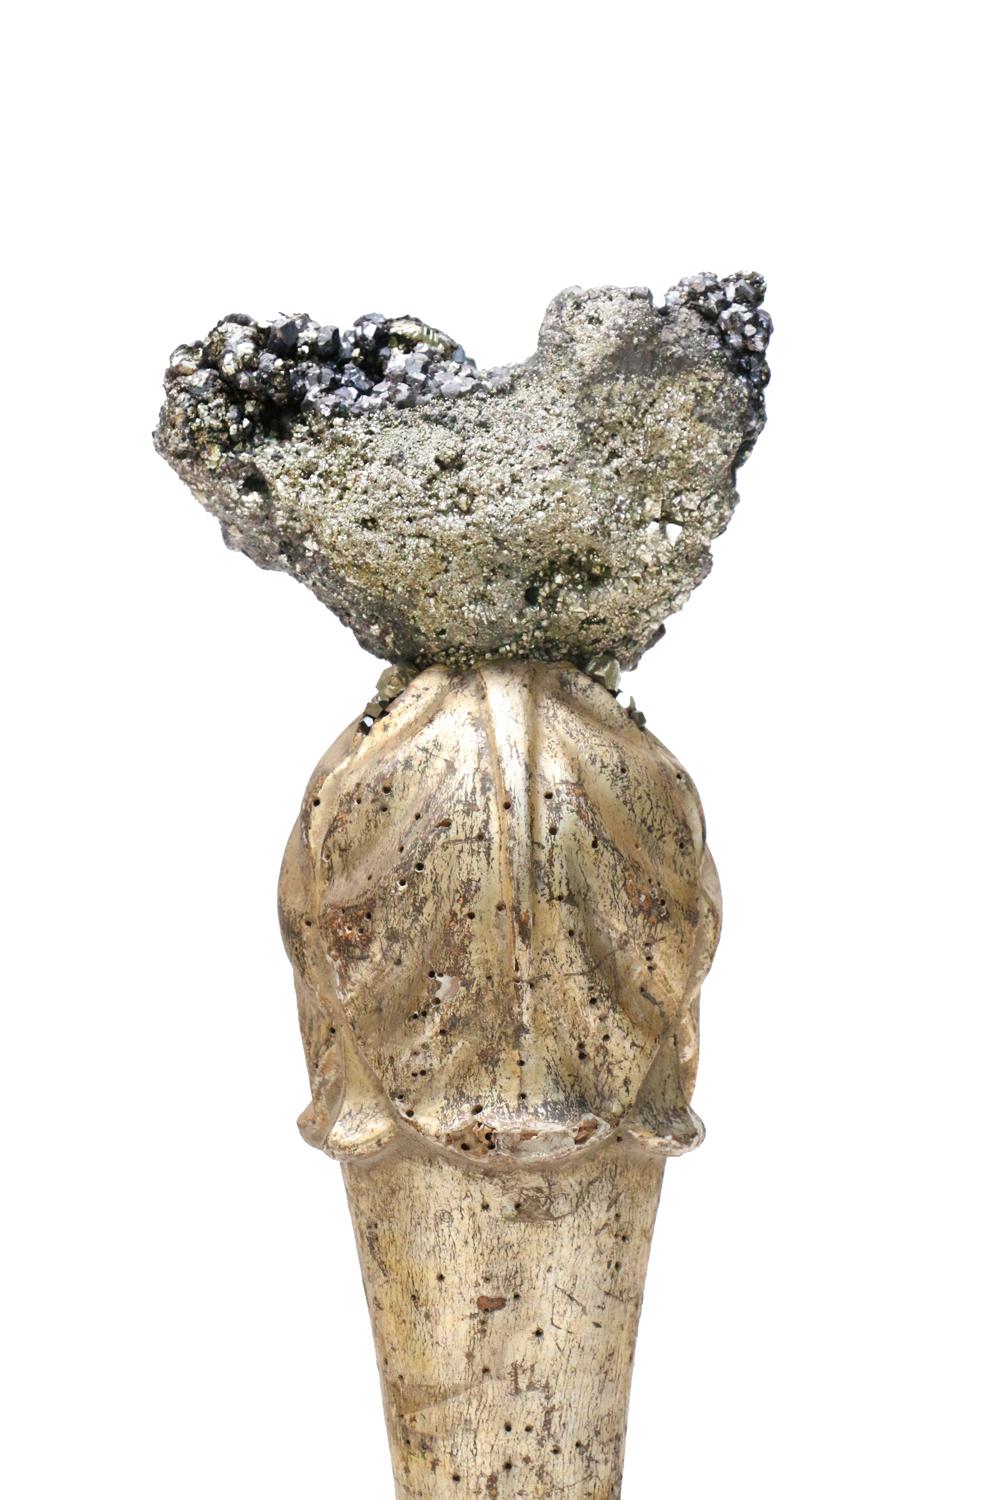 Rococo Sculptural 18th Century Italian Candlestick Fragment with Galena and Pyrite For Sale